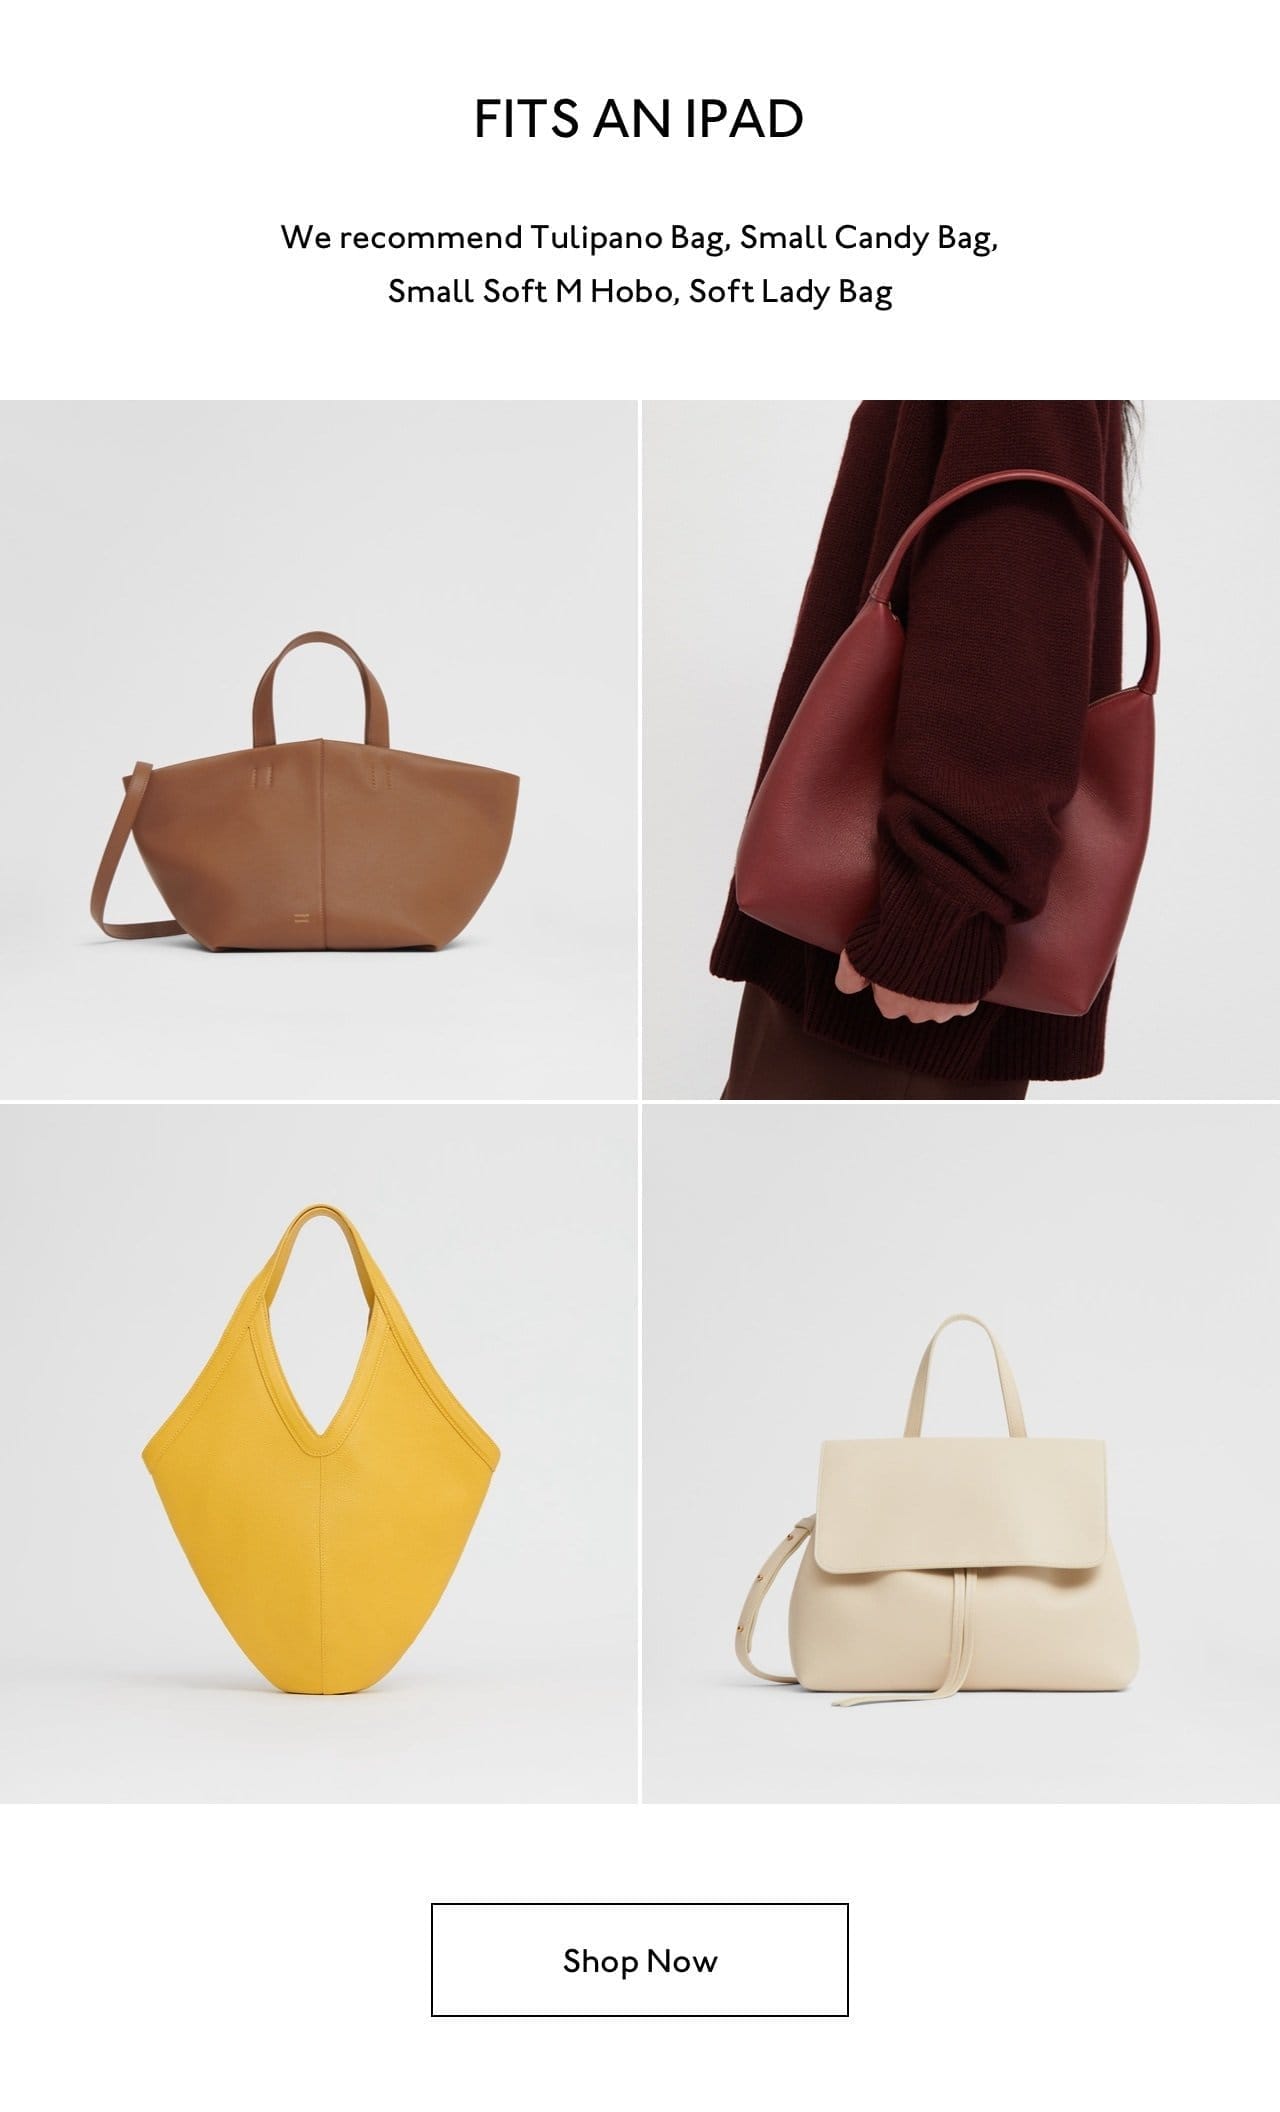 Fits an iPad. We recommend Tulipano Bag, Small Candy Bag, Small Soft M Hobo, Soft Lady Bag.